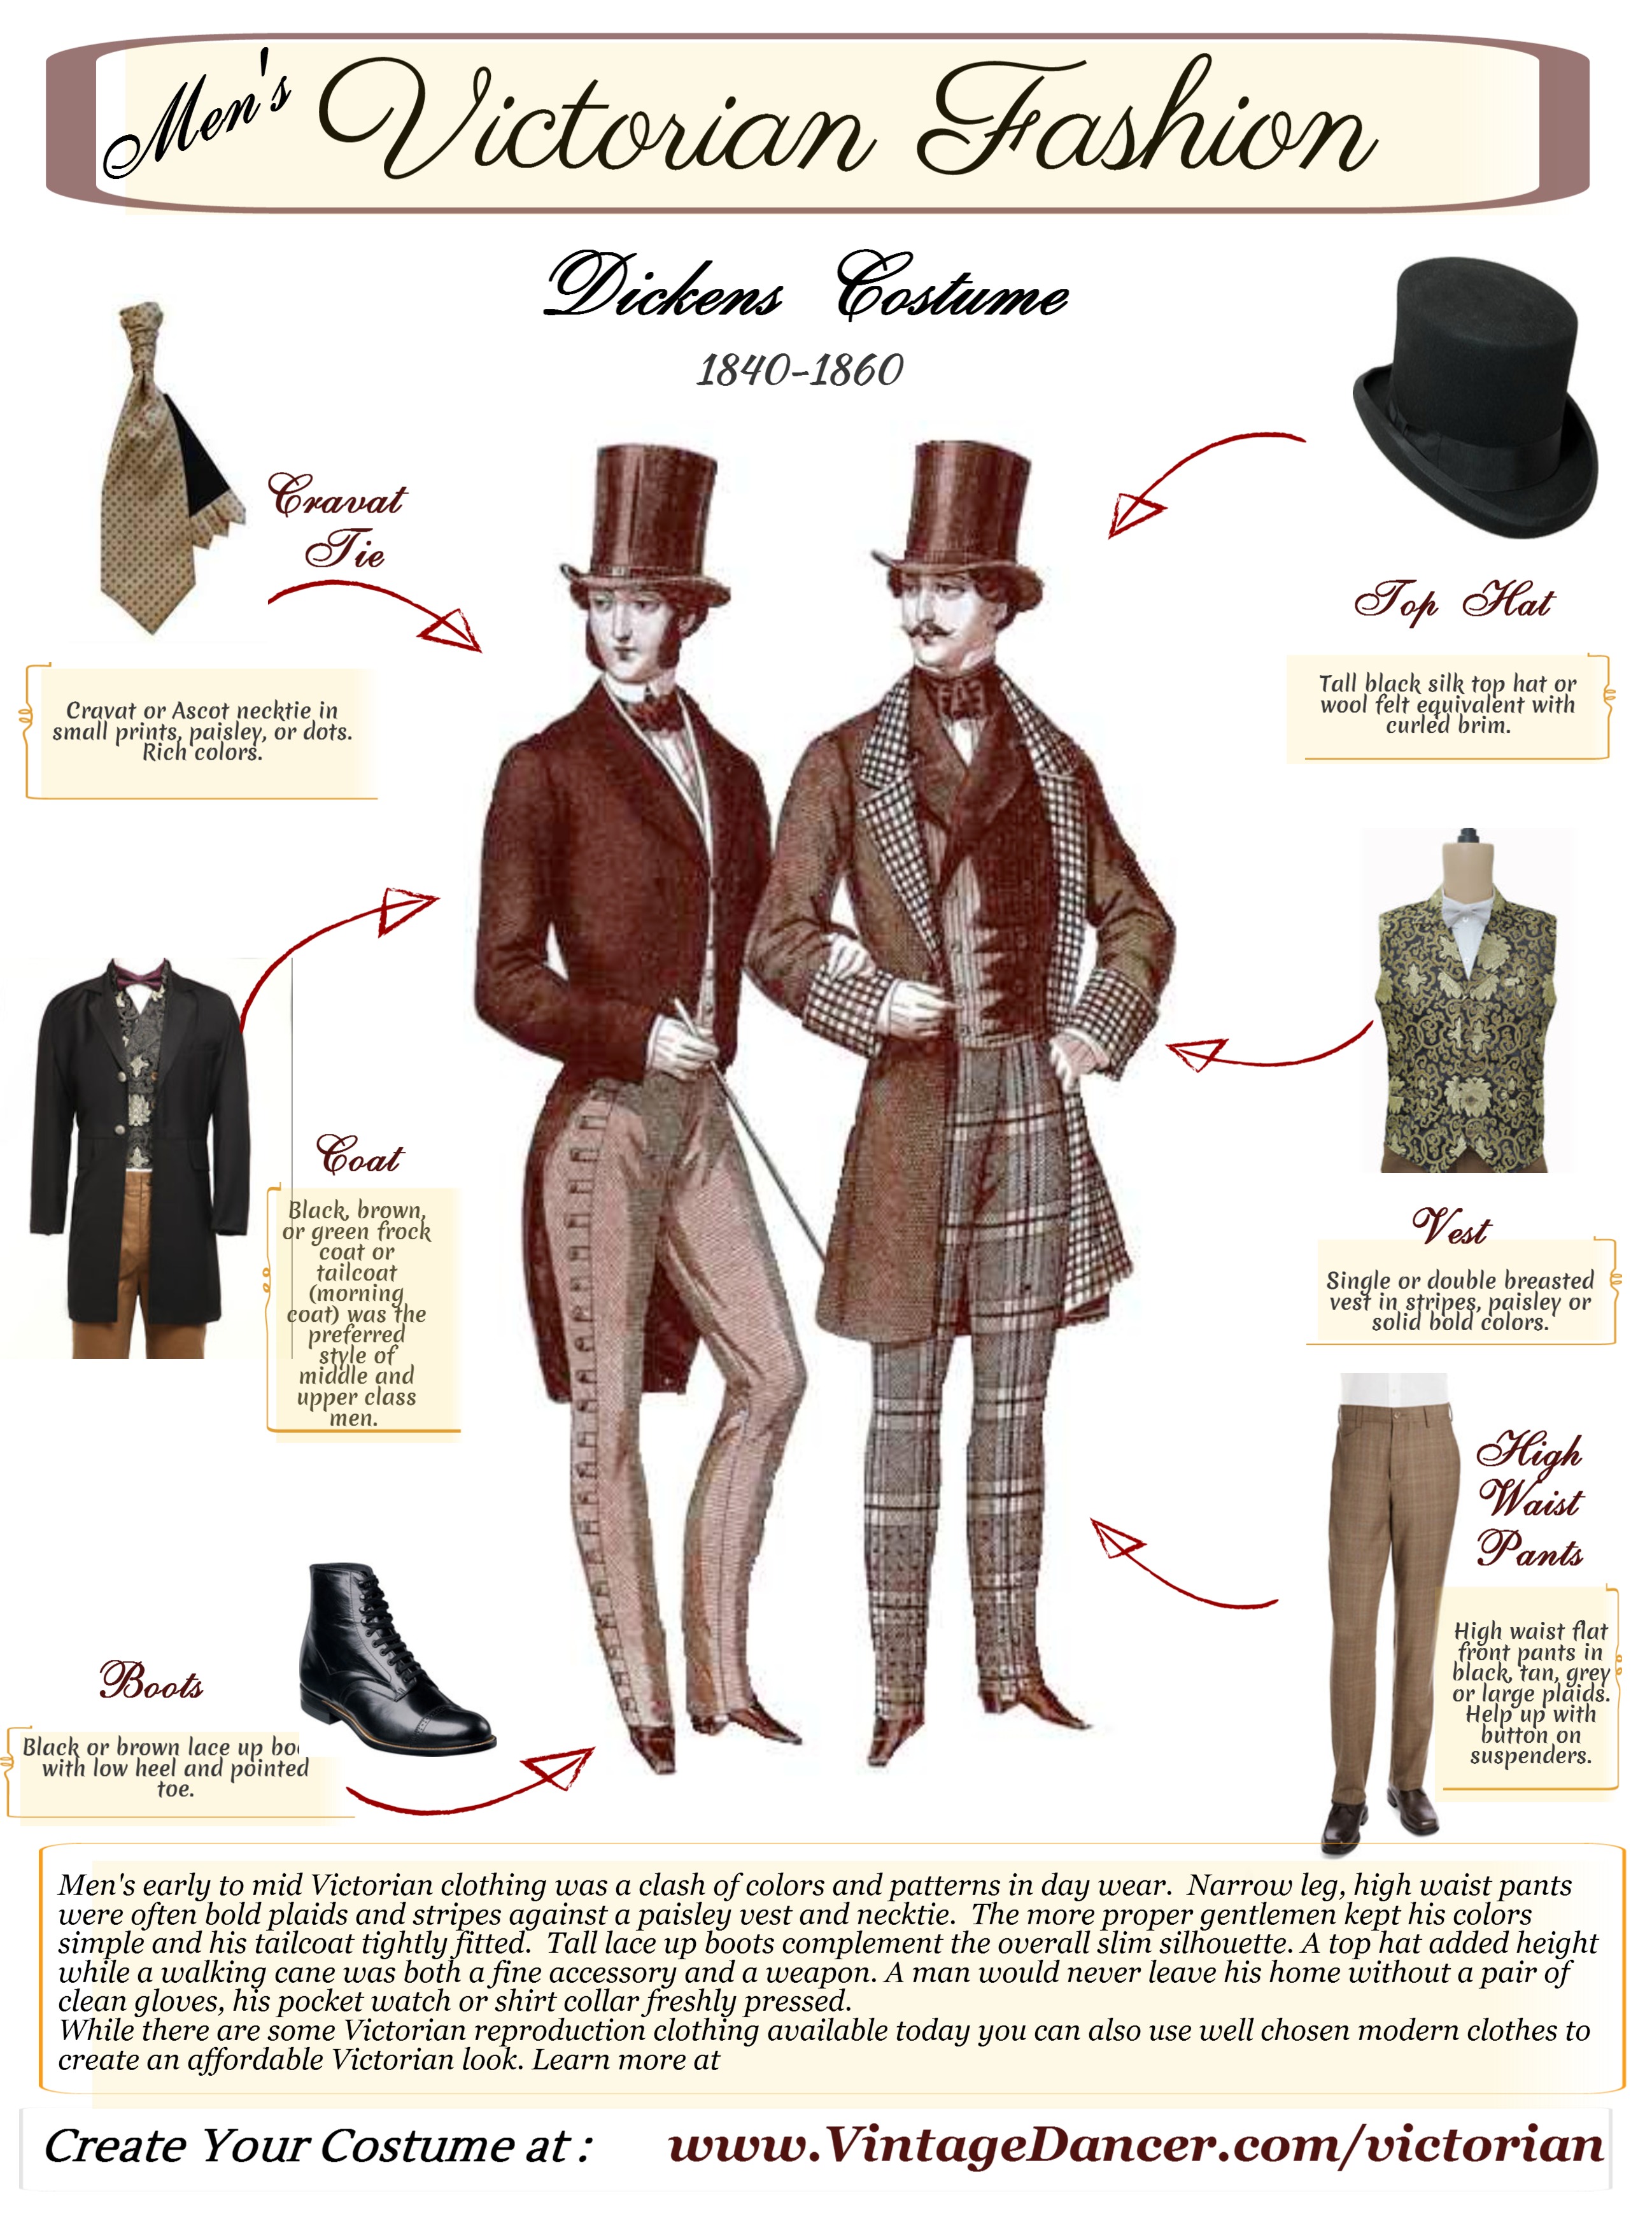 Men’s Victorian Costume and Clothing Guide